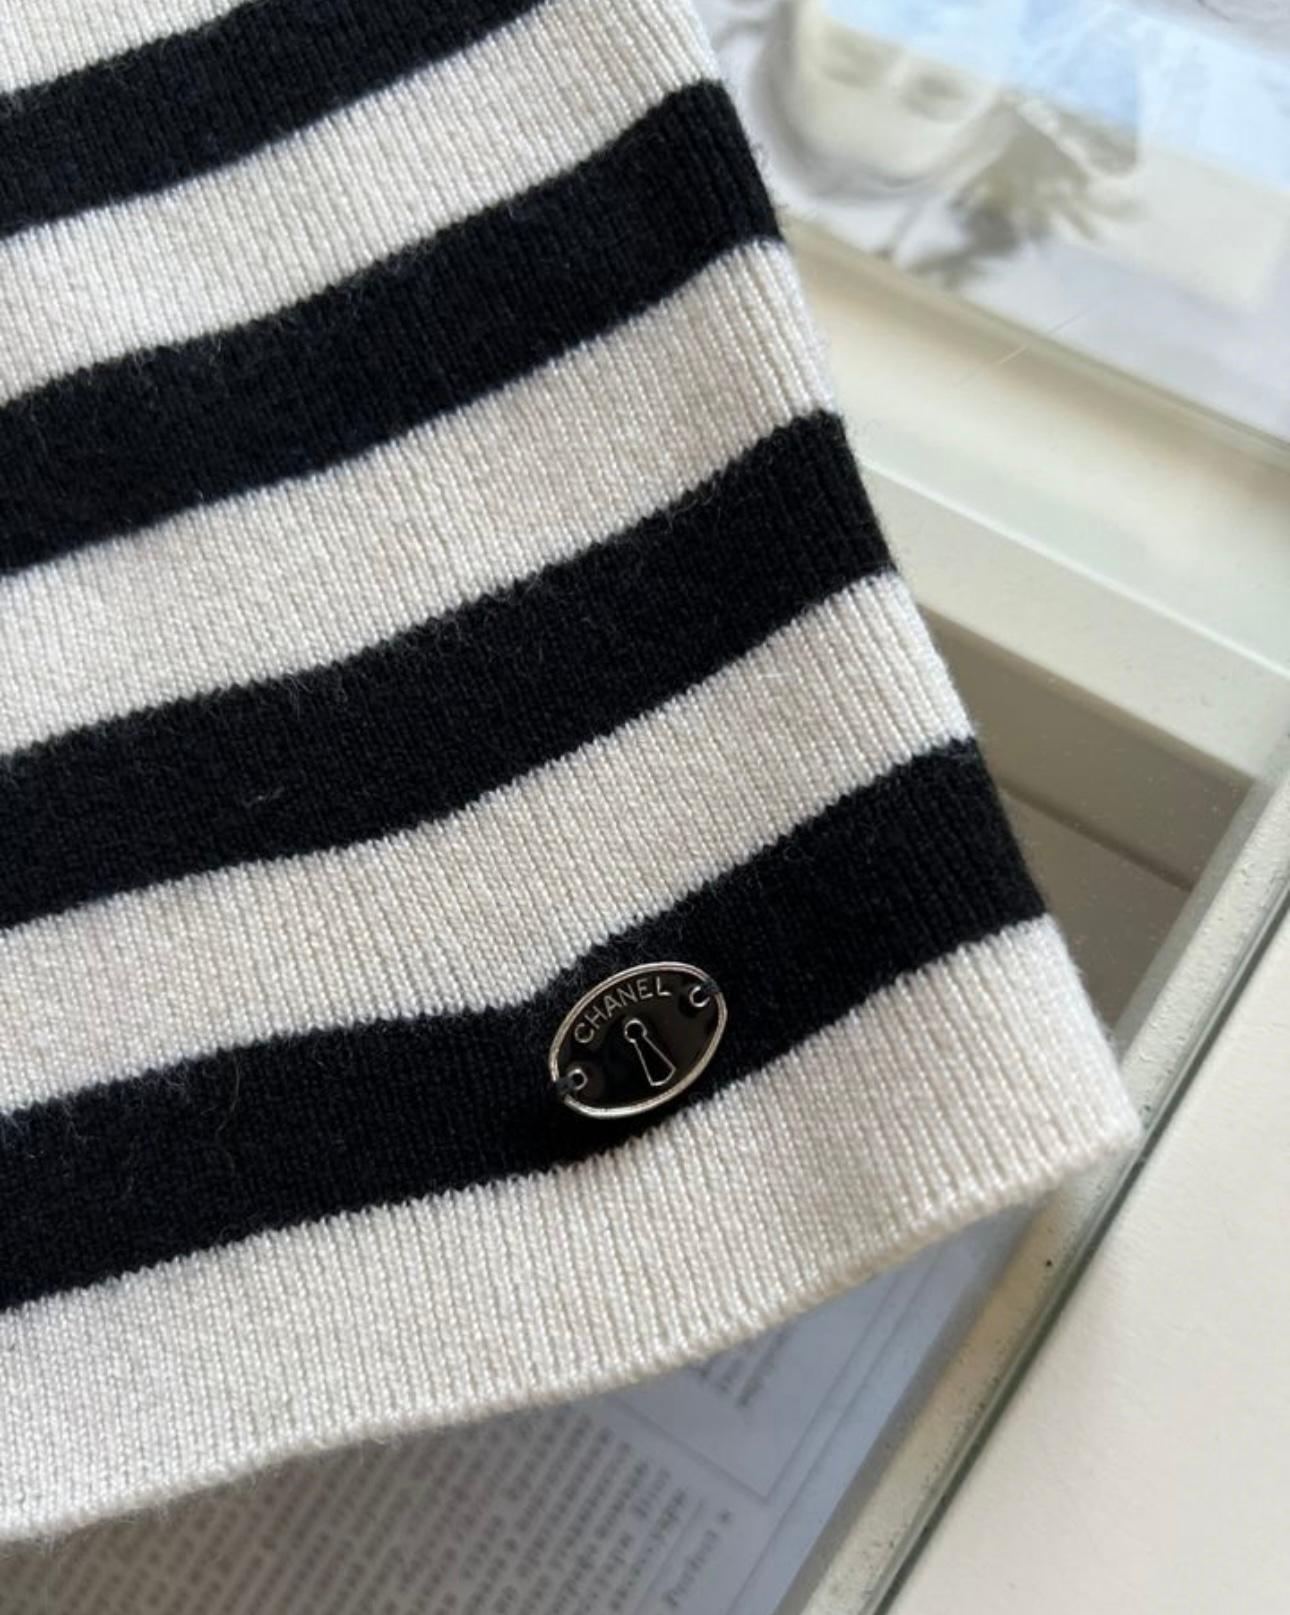 Charming Chanel striped cashmere jumper with CC logo charm at waist.
Size mark 40 FR. Pristine condition.